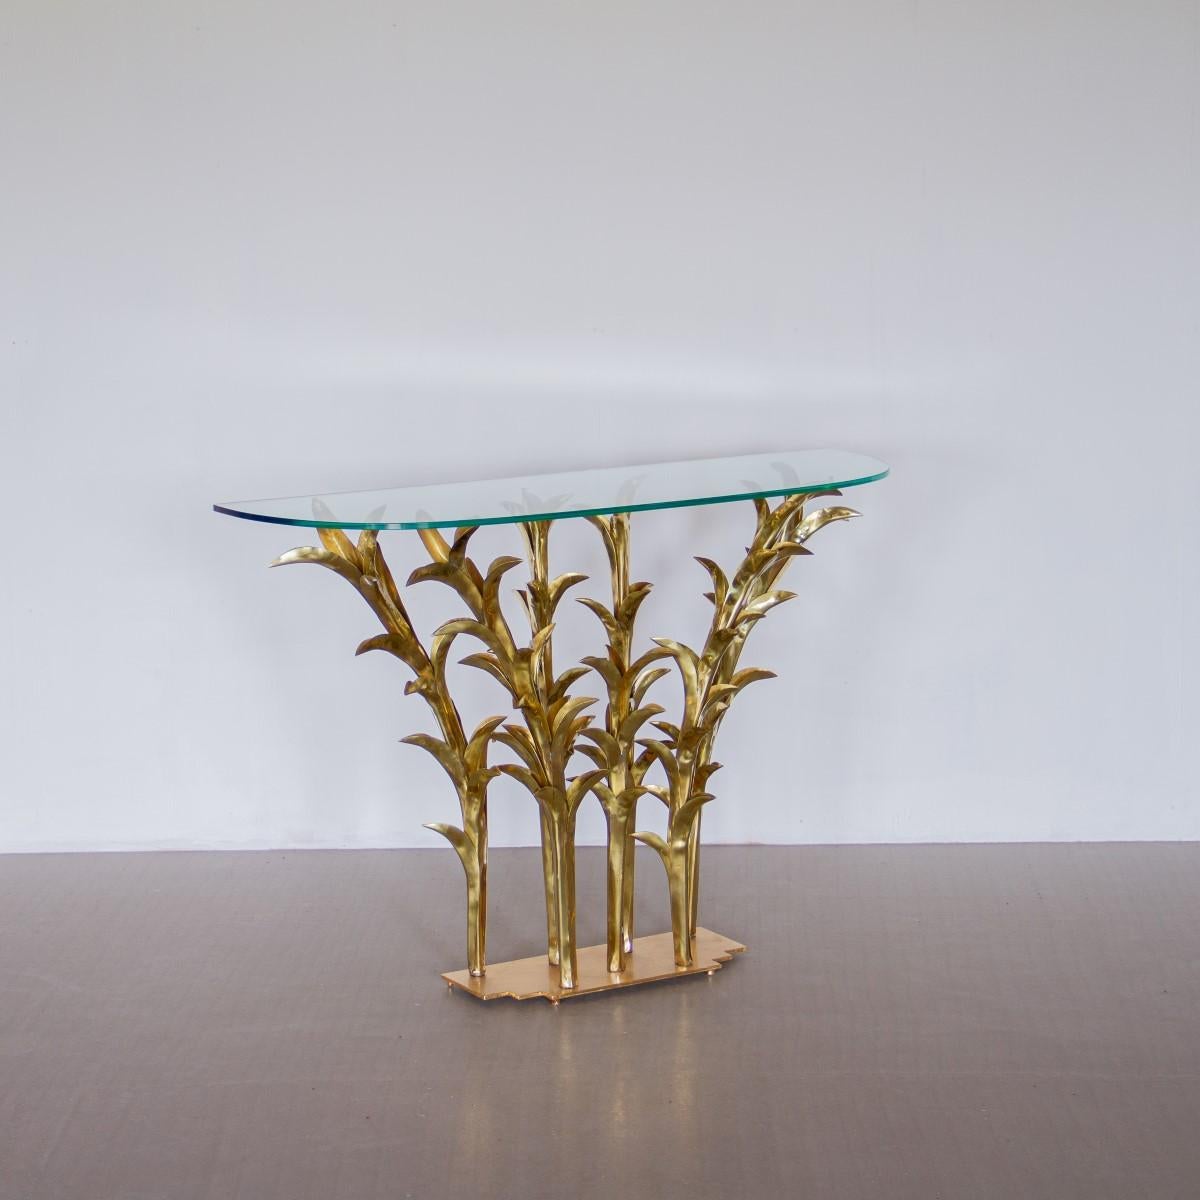 French Sculptural Console Table by Alain Chervet, 1992 Titled 'Madere' For Sale